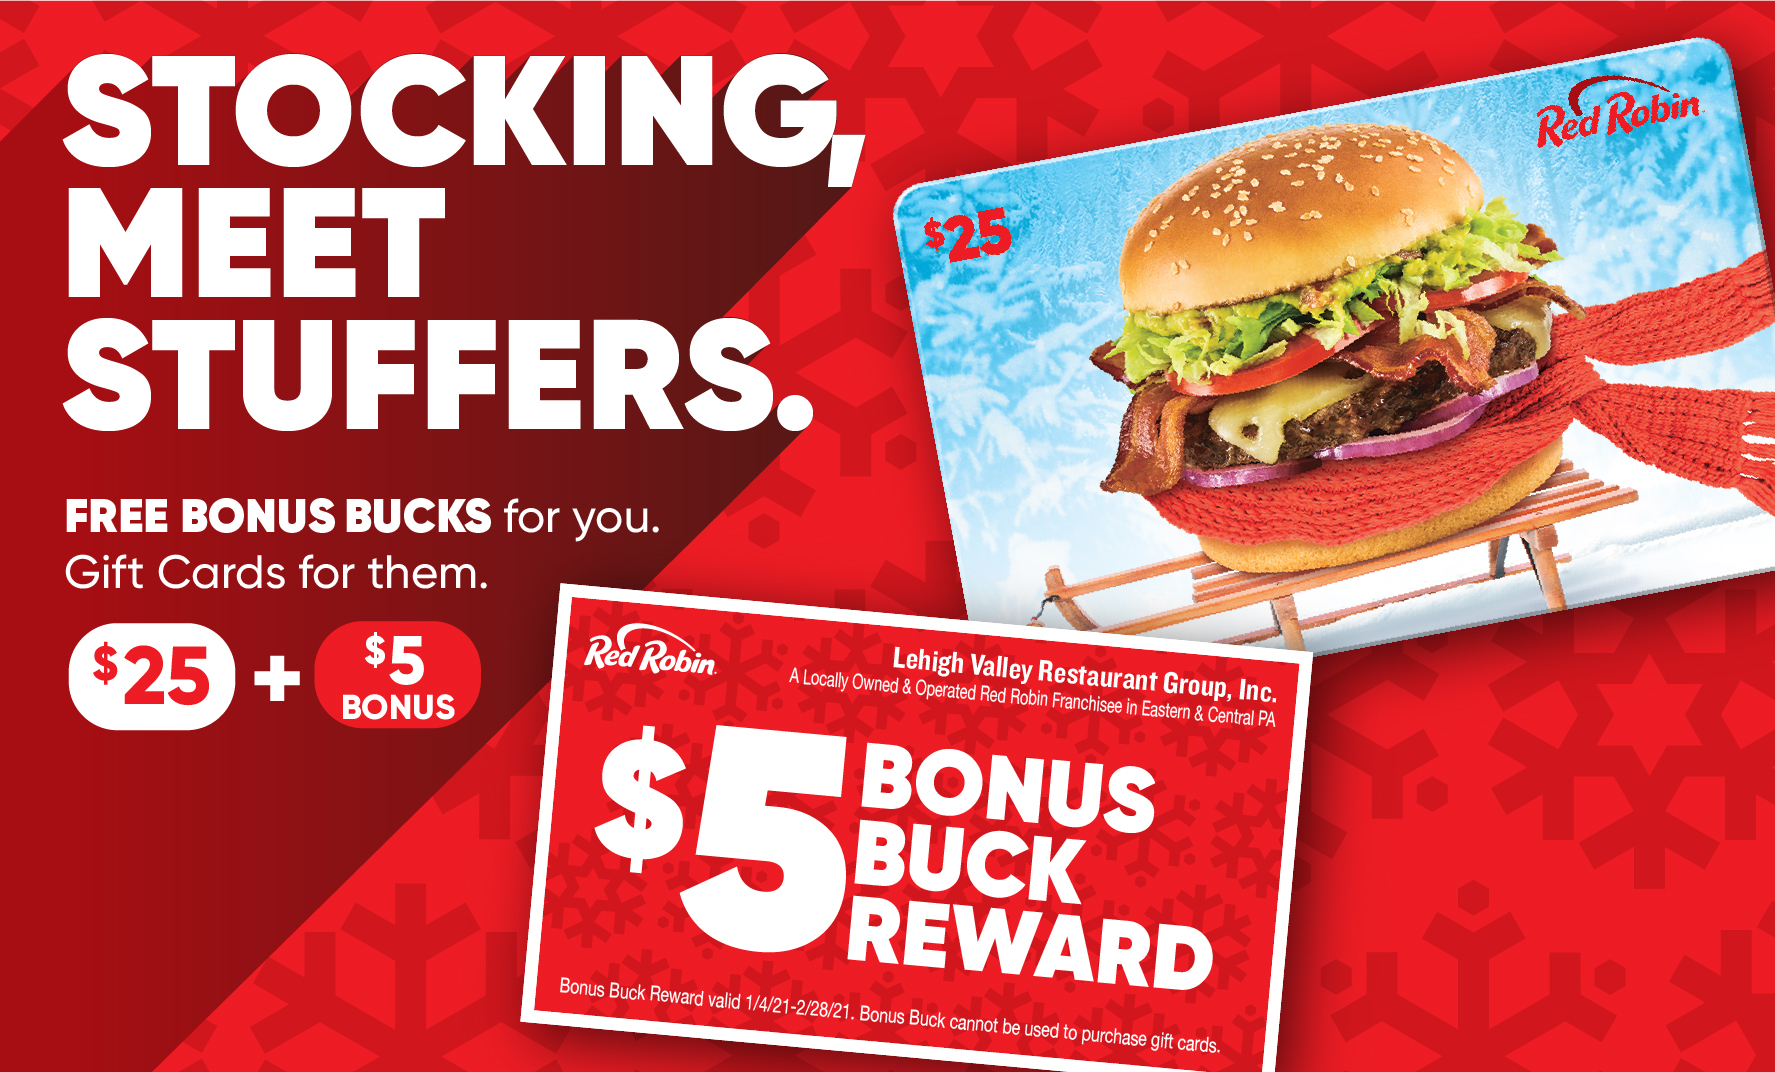 2020 LVRG Holiday Gift Card_Bonus Buck Program. For Every $25 gift card purchased, receive a $5 Bonus Buck. Restrictions apply.